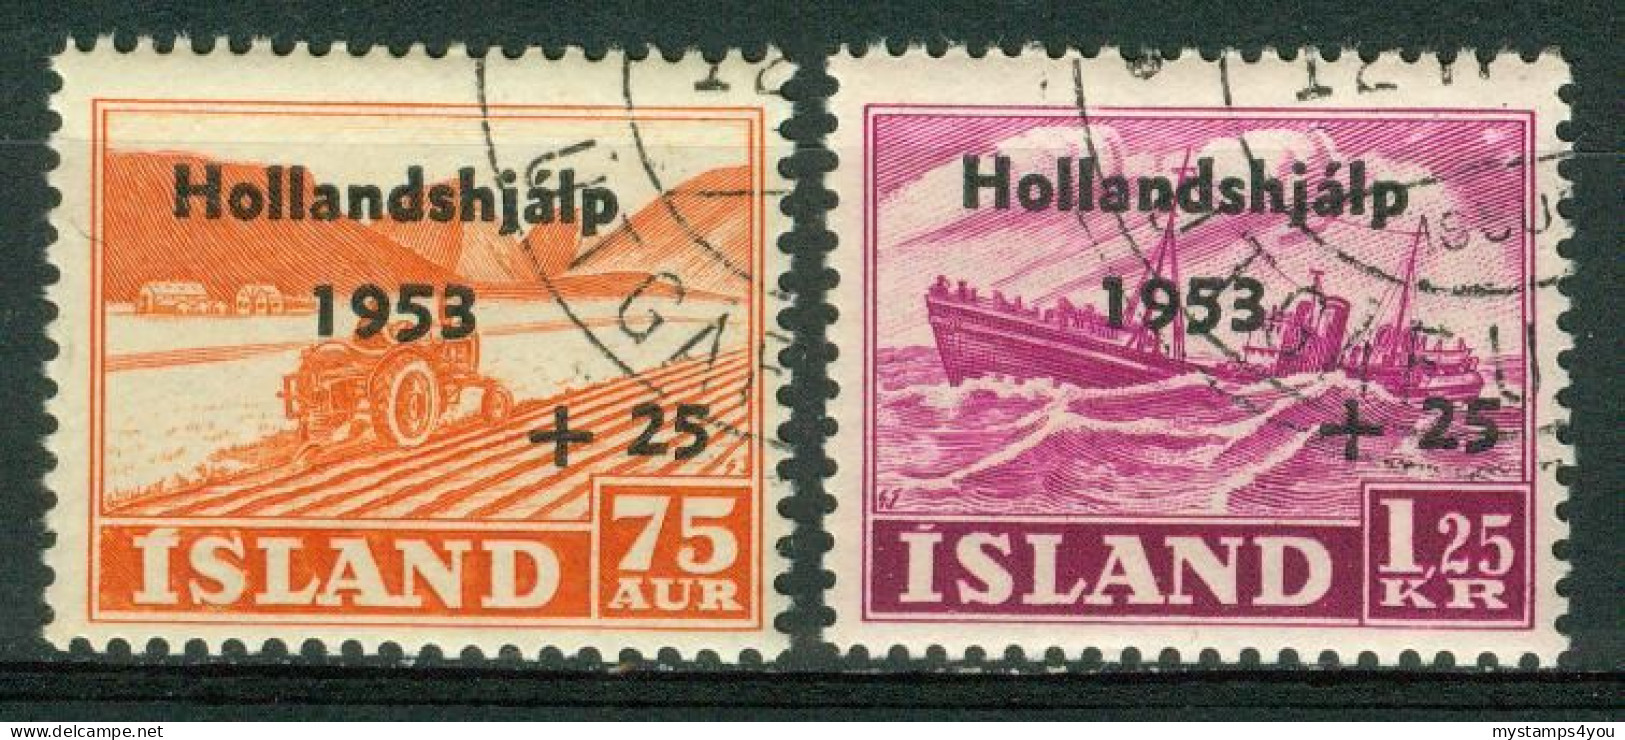 Bm Iceland 1953 MiNr 285-286 Used | Netherlands Flood Relief Fund #5-0211 - Used Stamps